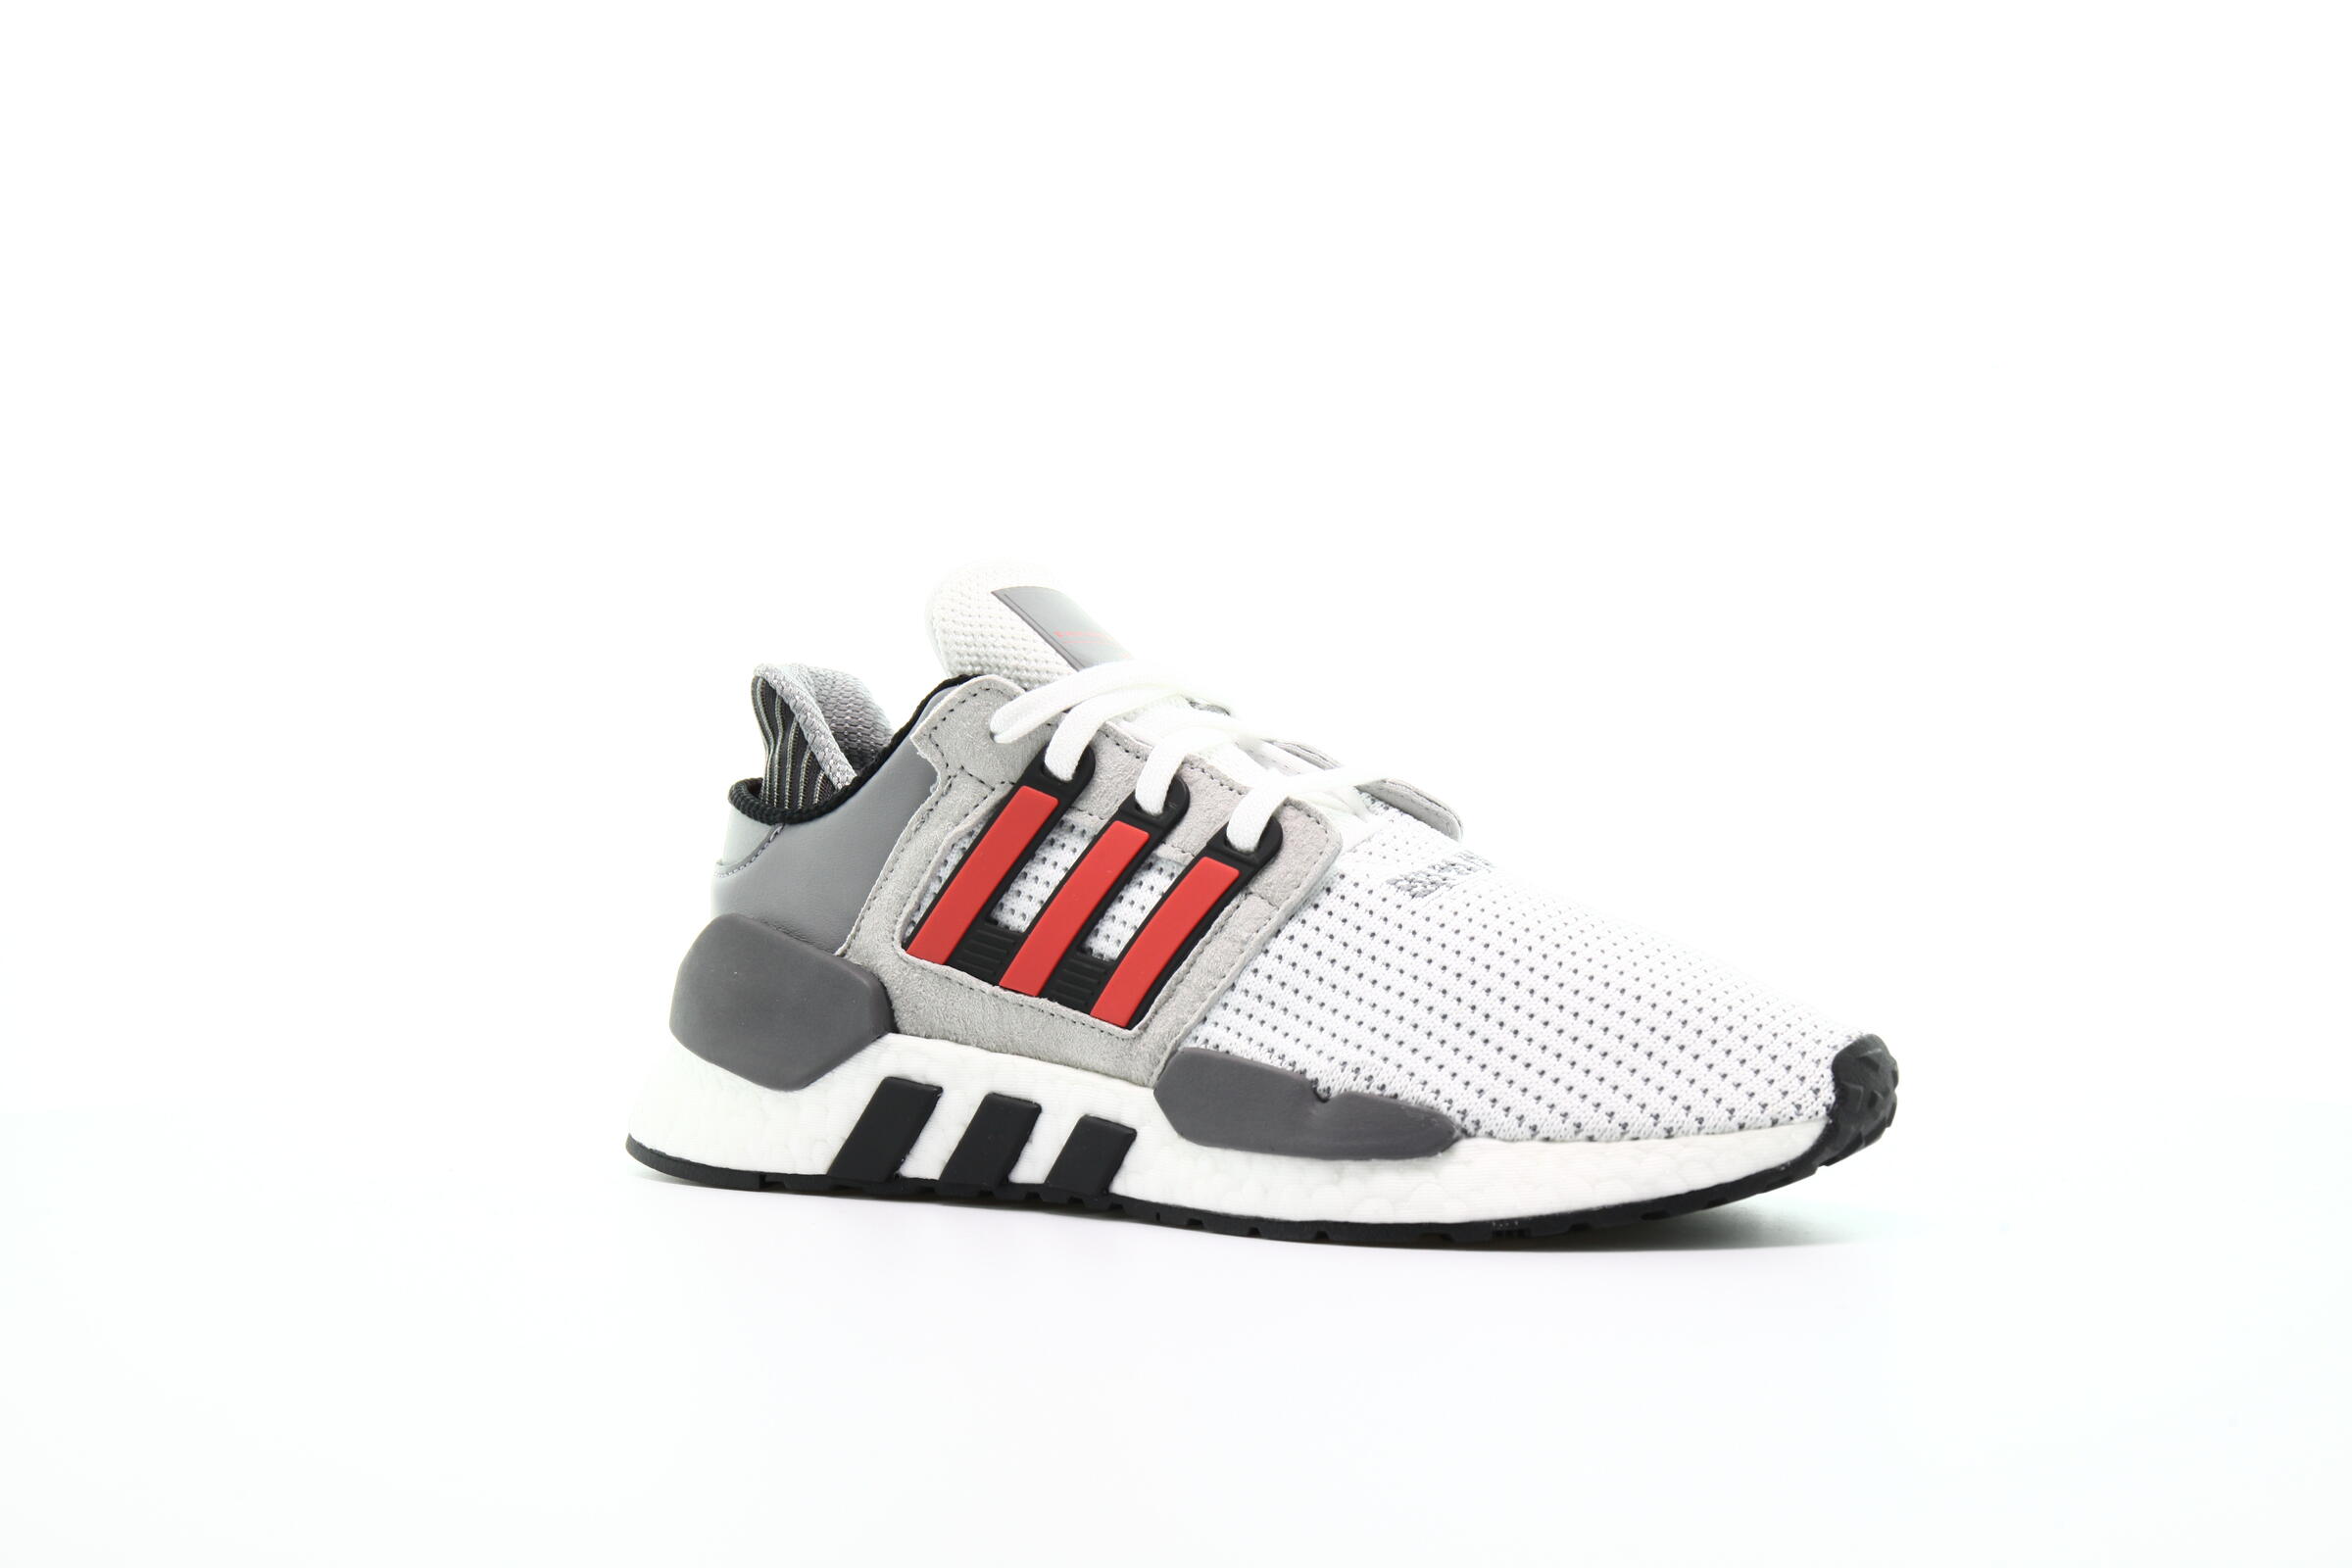 adidas Performance EQT Support 91/18 "White & Grey"